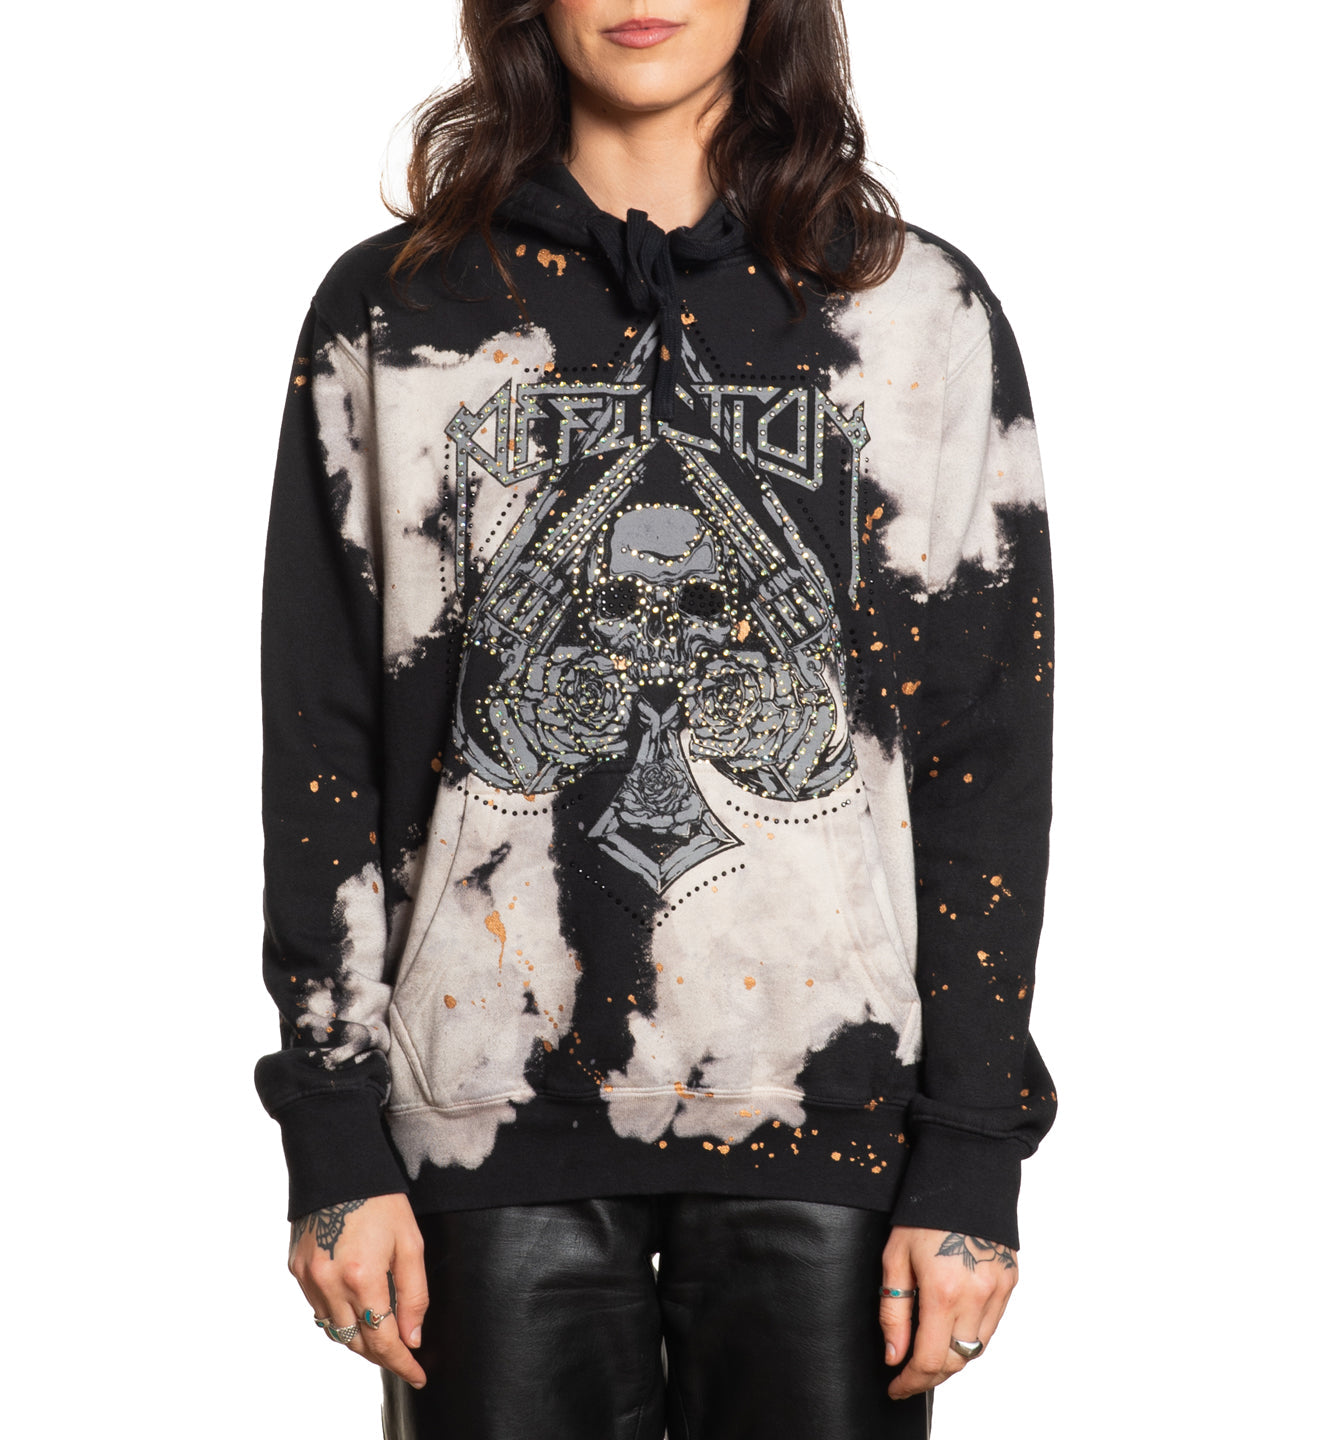 Womens Hooded Sweatshirts - Hollow Point